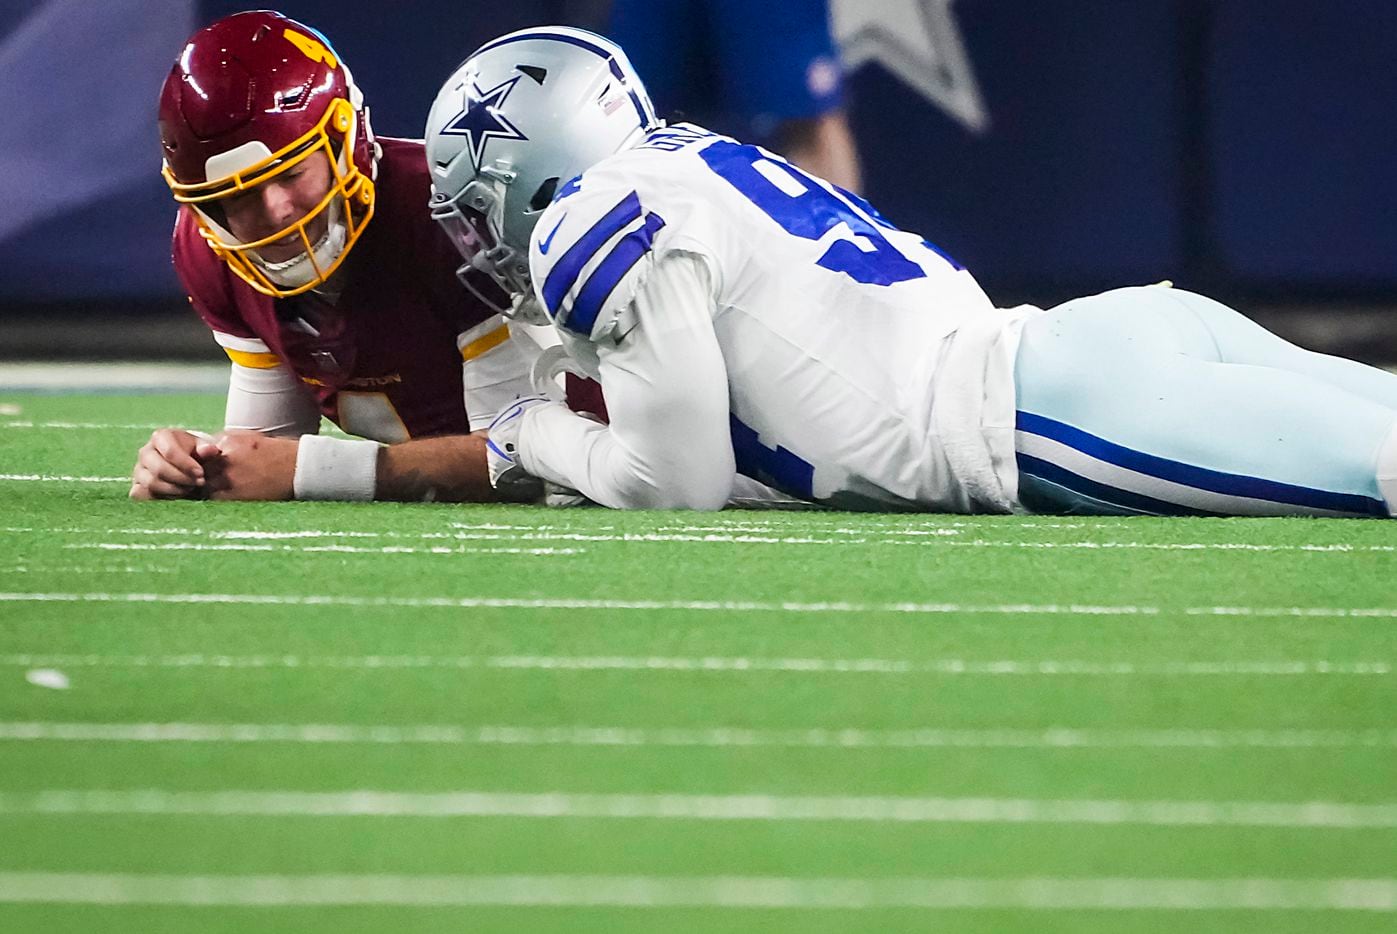 Dallas Cowboys defensive end Randy Gregory (94) lies on the ground and talks with Washington Football Team quarterback Taylor Heinicke (4) during the first half of an NFL football game at AT&T Stadium on Sunday, Dec. 26, 2021, in Arlington.